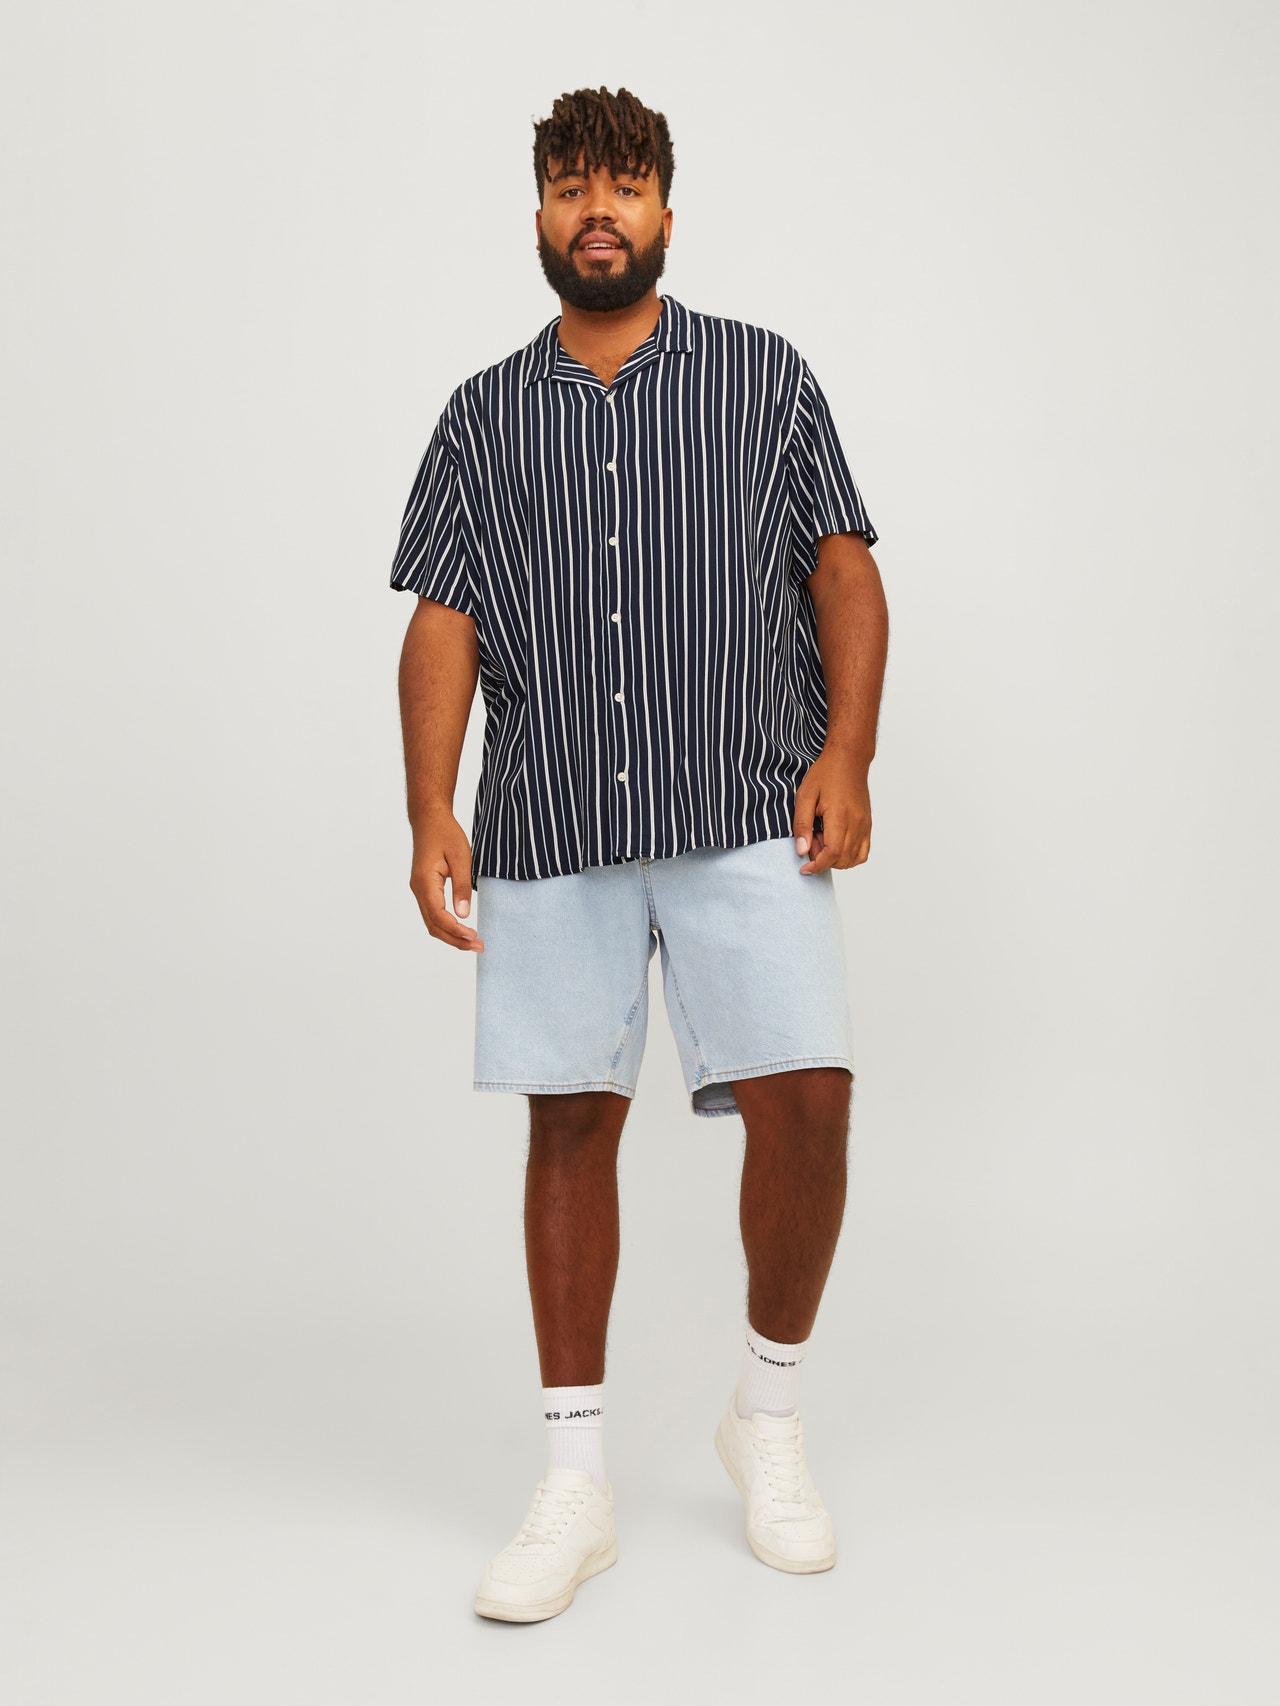 Jack & Jones Plus Size Stile Hawaiano Relaxed Fit -Sky Captain - 12261512